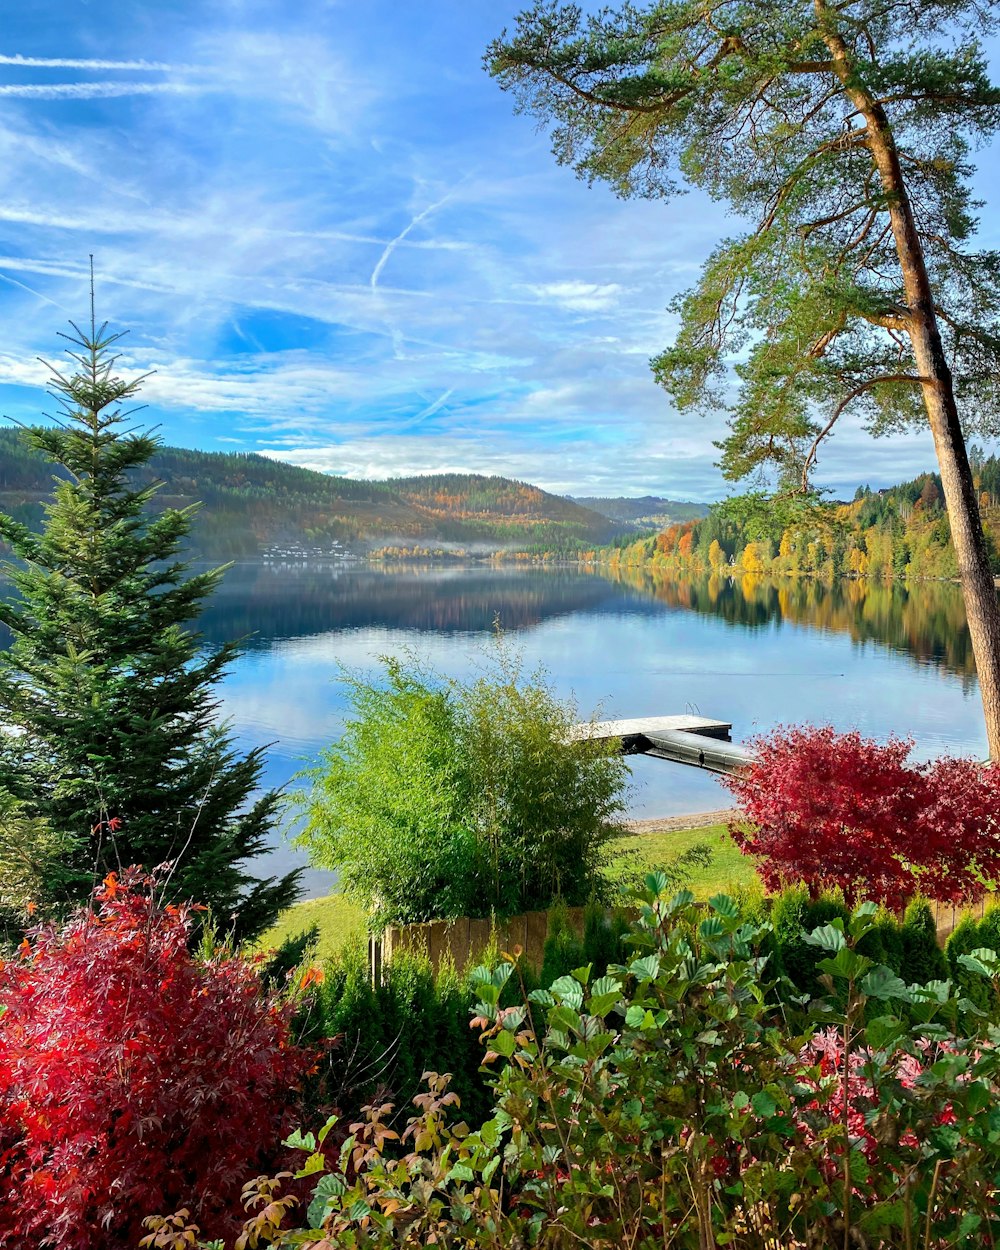 a scenic view of a lake surrounded by trees